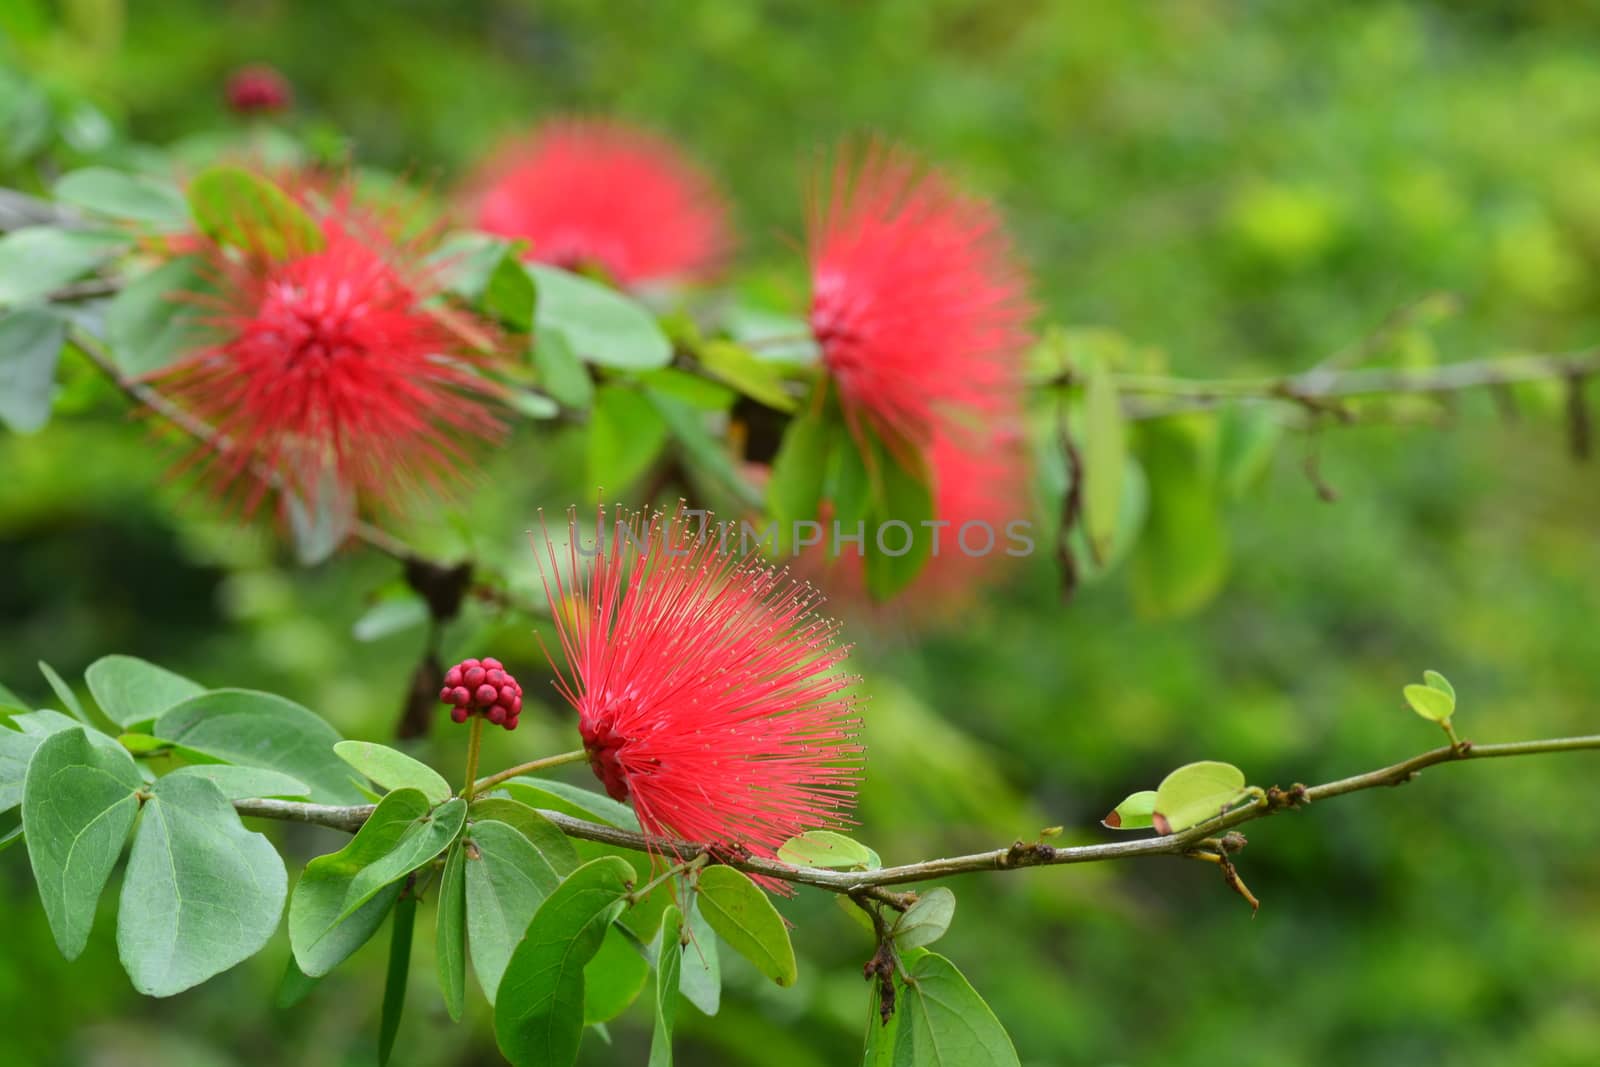 Pink Red Powder Puff or  Calliandra haematocephala Hassk by ideation90